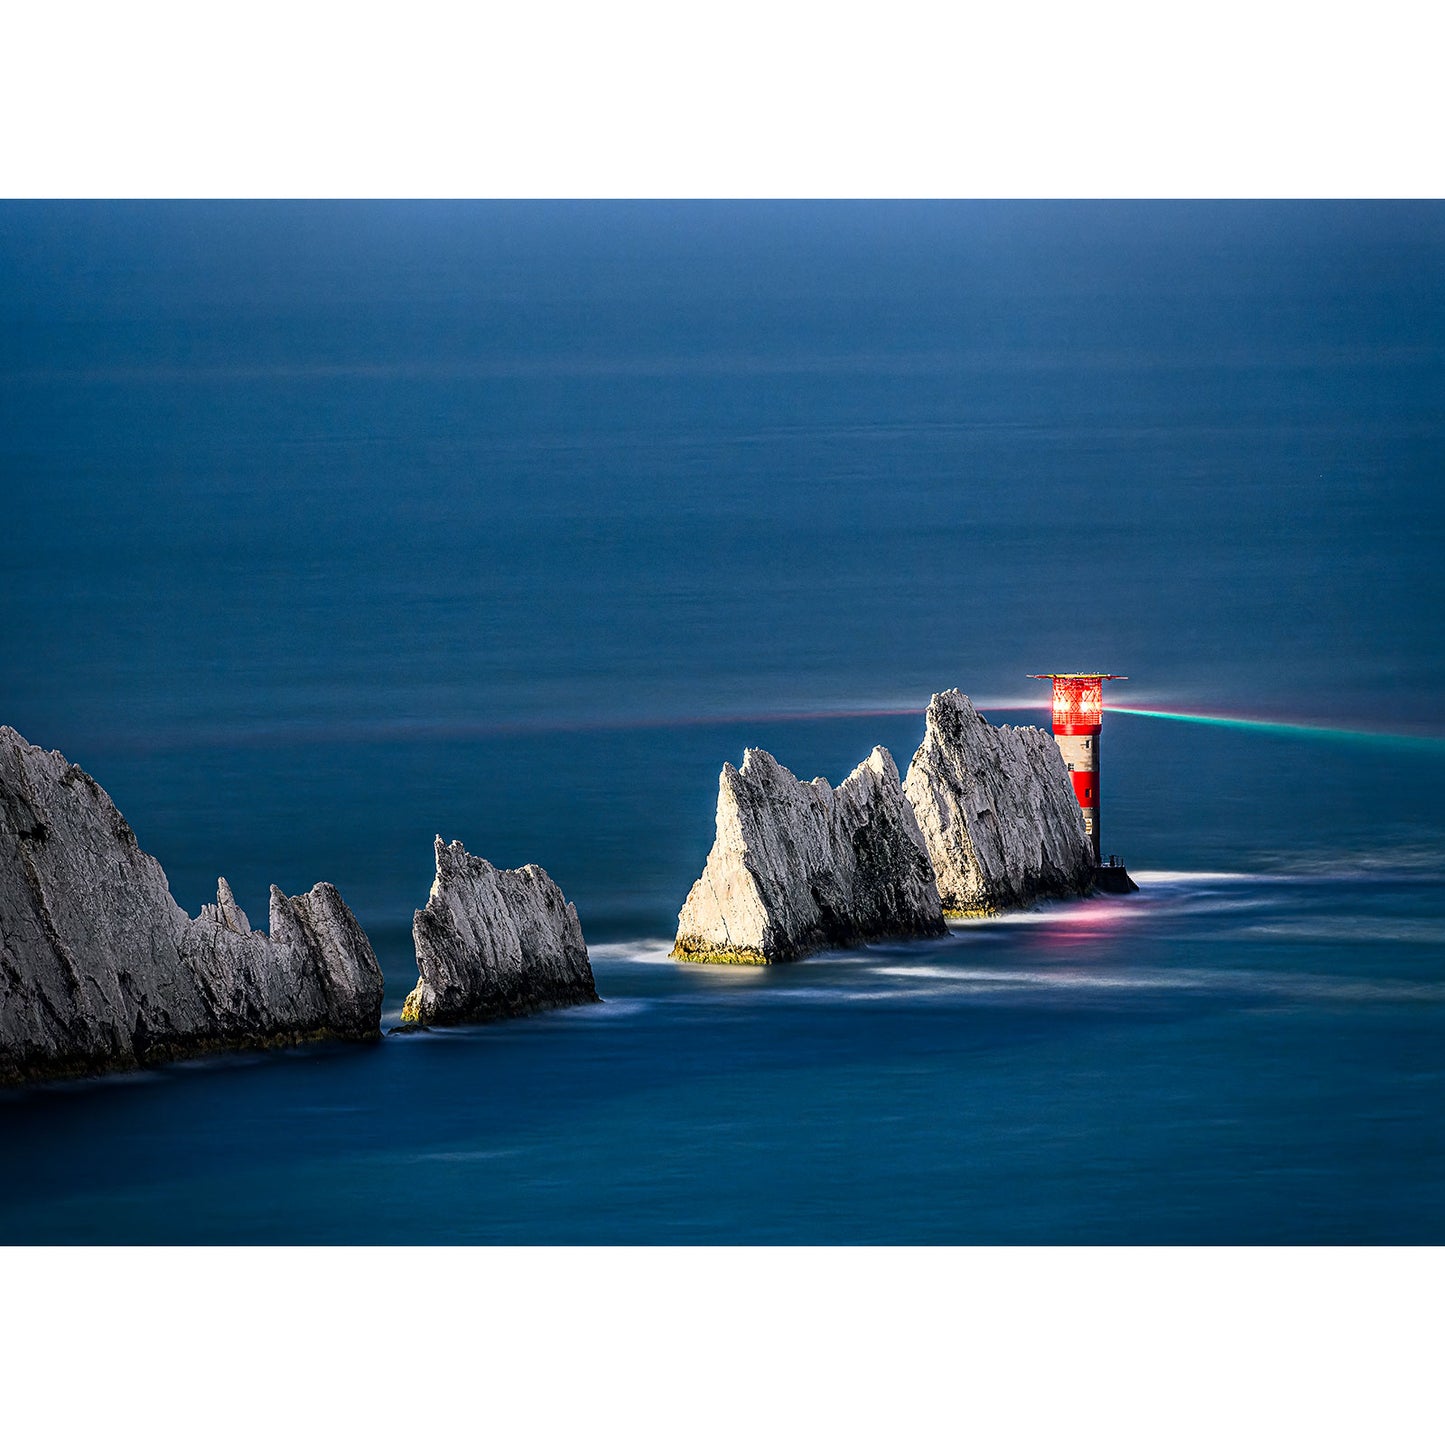 The Needles by Moonlight